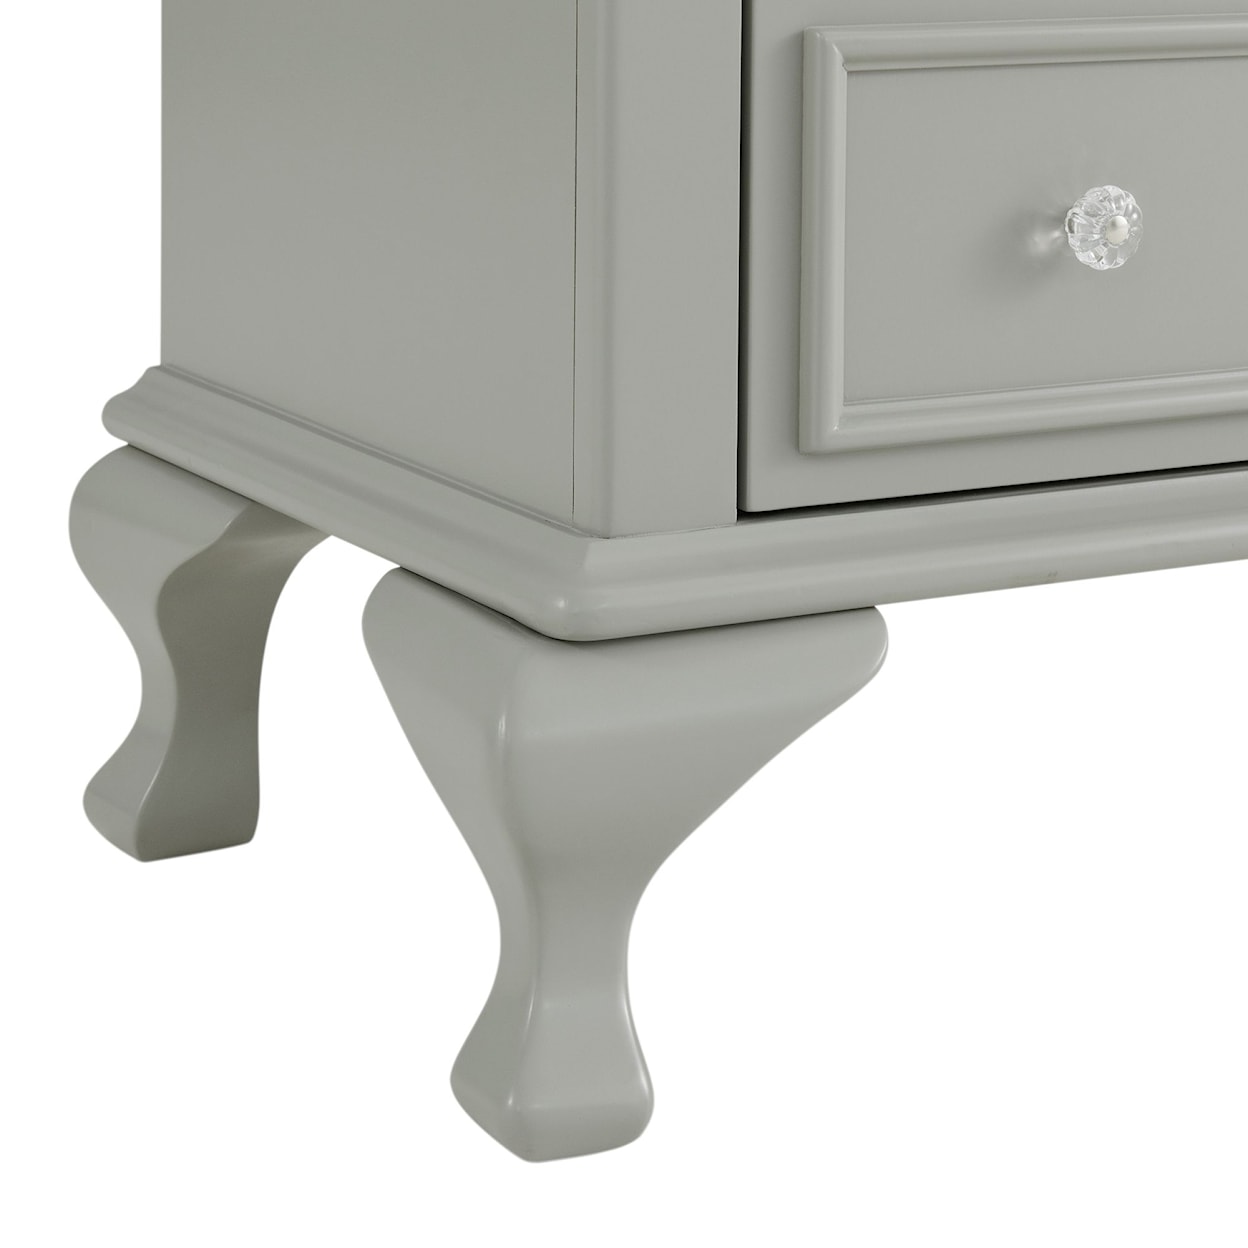 Elements International Jesse Nightstand in Grey (3A packing)